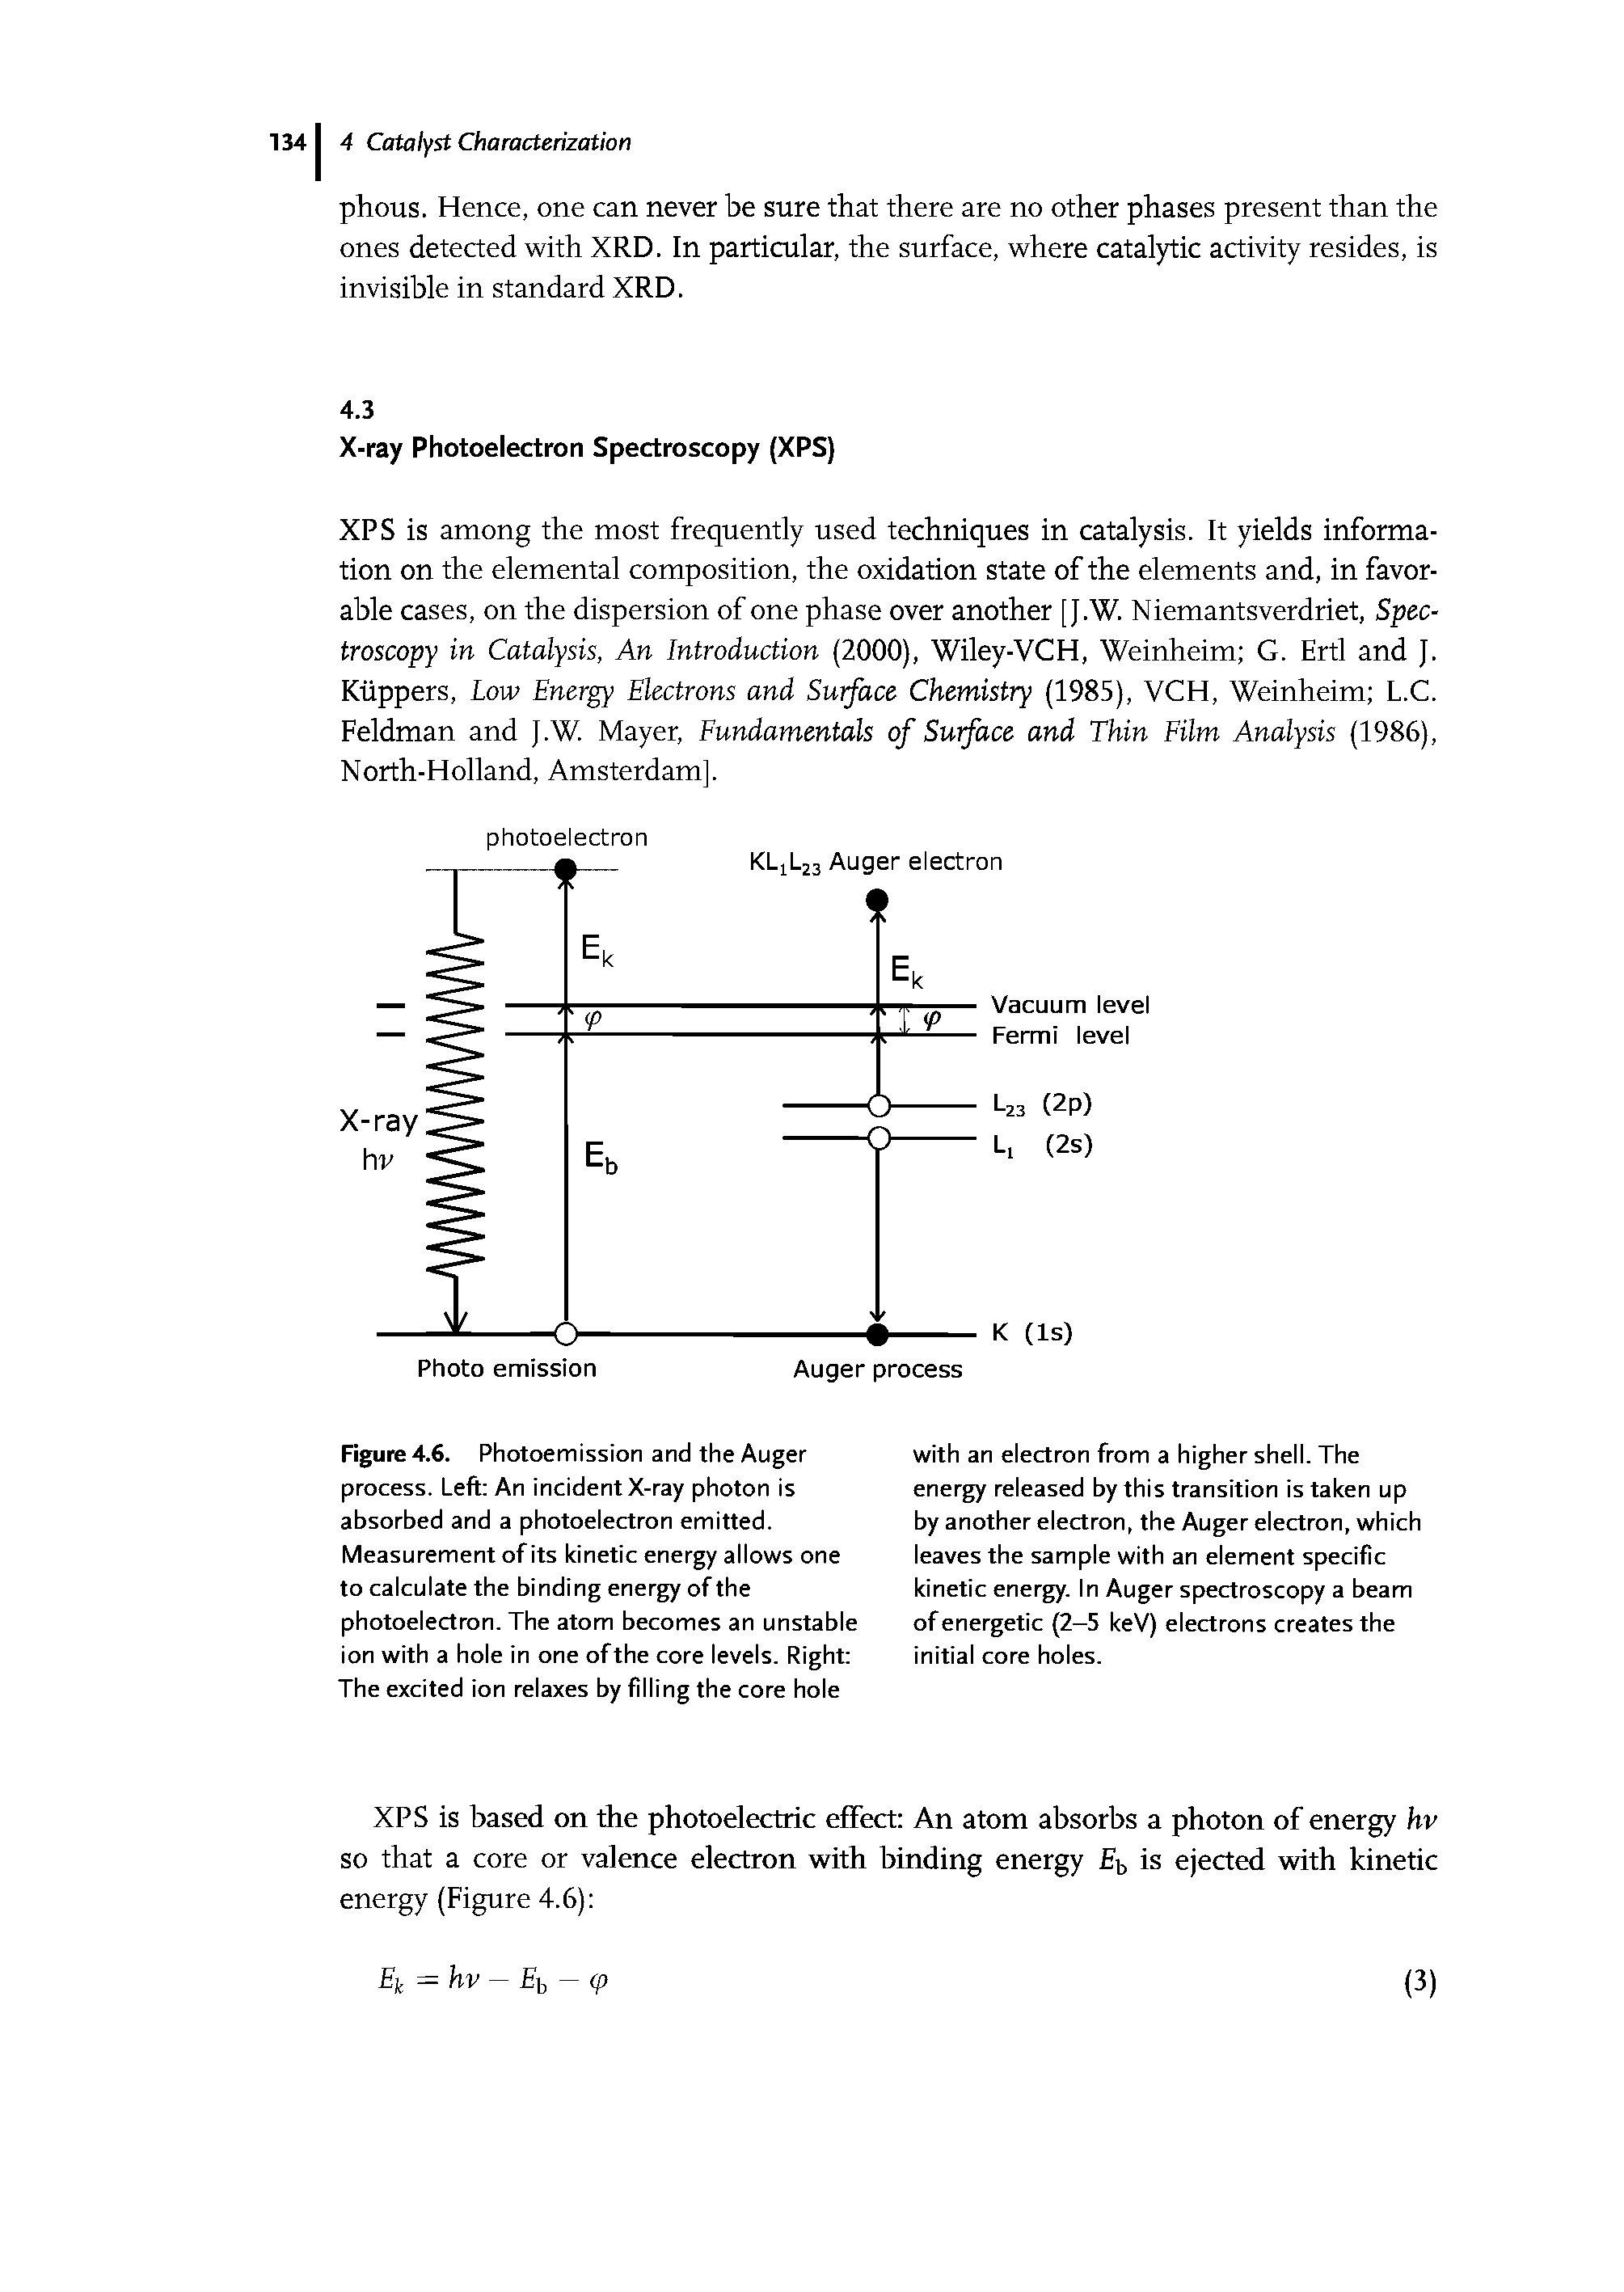 Figure 4.6. Photoemission and the Auger process. Left An incident X-ray photon is absorbed and a photoelectron emitted. Measurement of its kinetic energy allows one to calculate the binding energy of the photoelectron. The atom becomes an unstable ion with a hole in one of the core levels. Right The excited ion relaxes by filling the core hole...